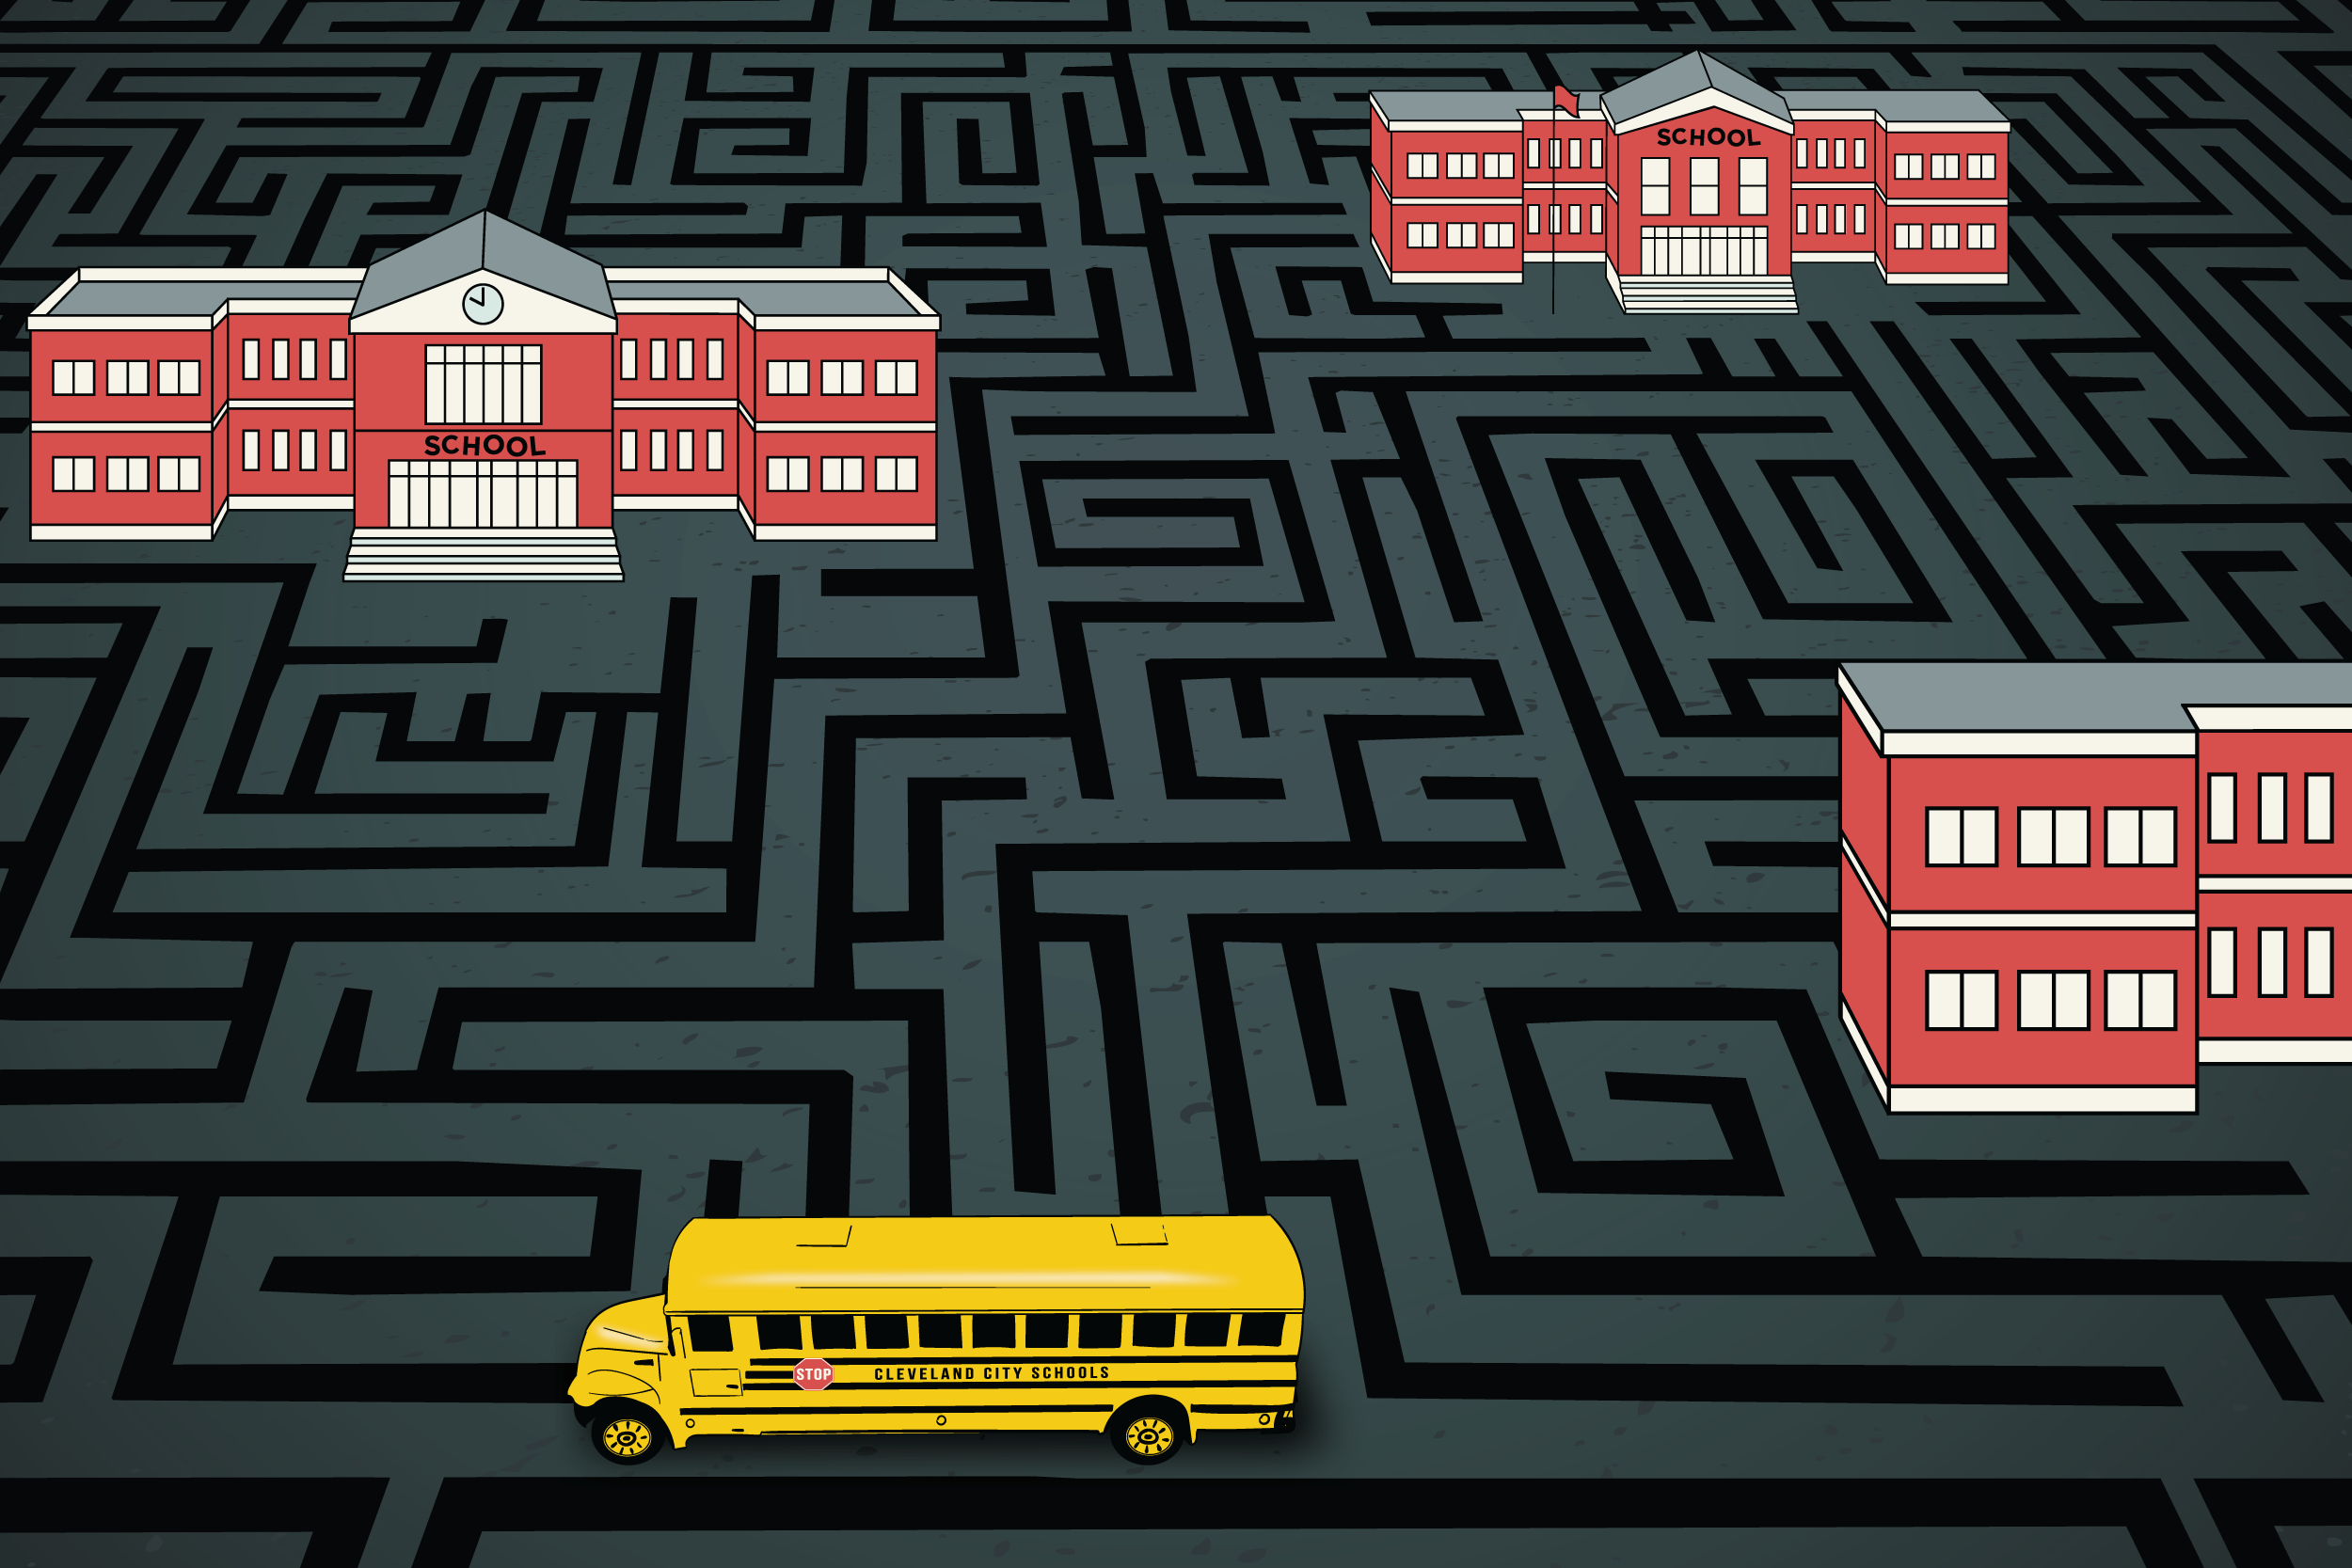 An illustration with a maze that shows different school buildings and a school bus.